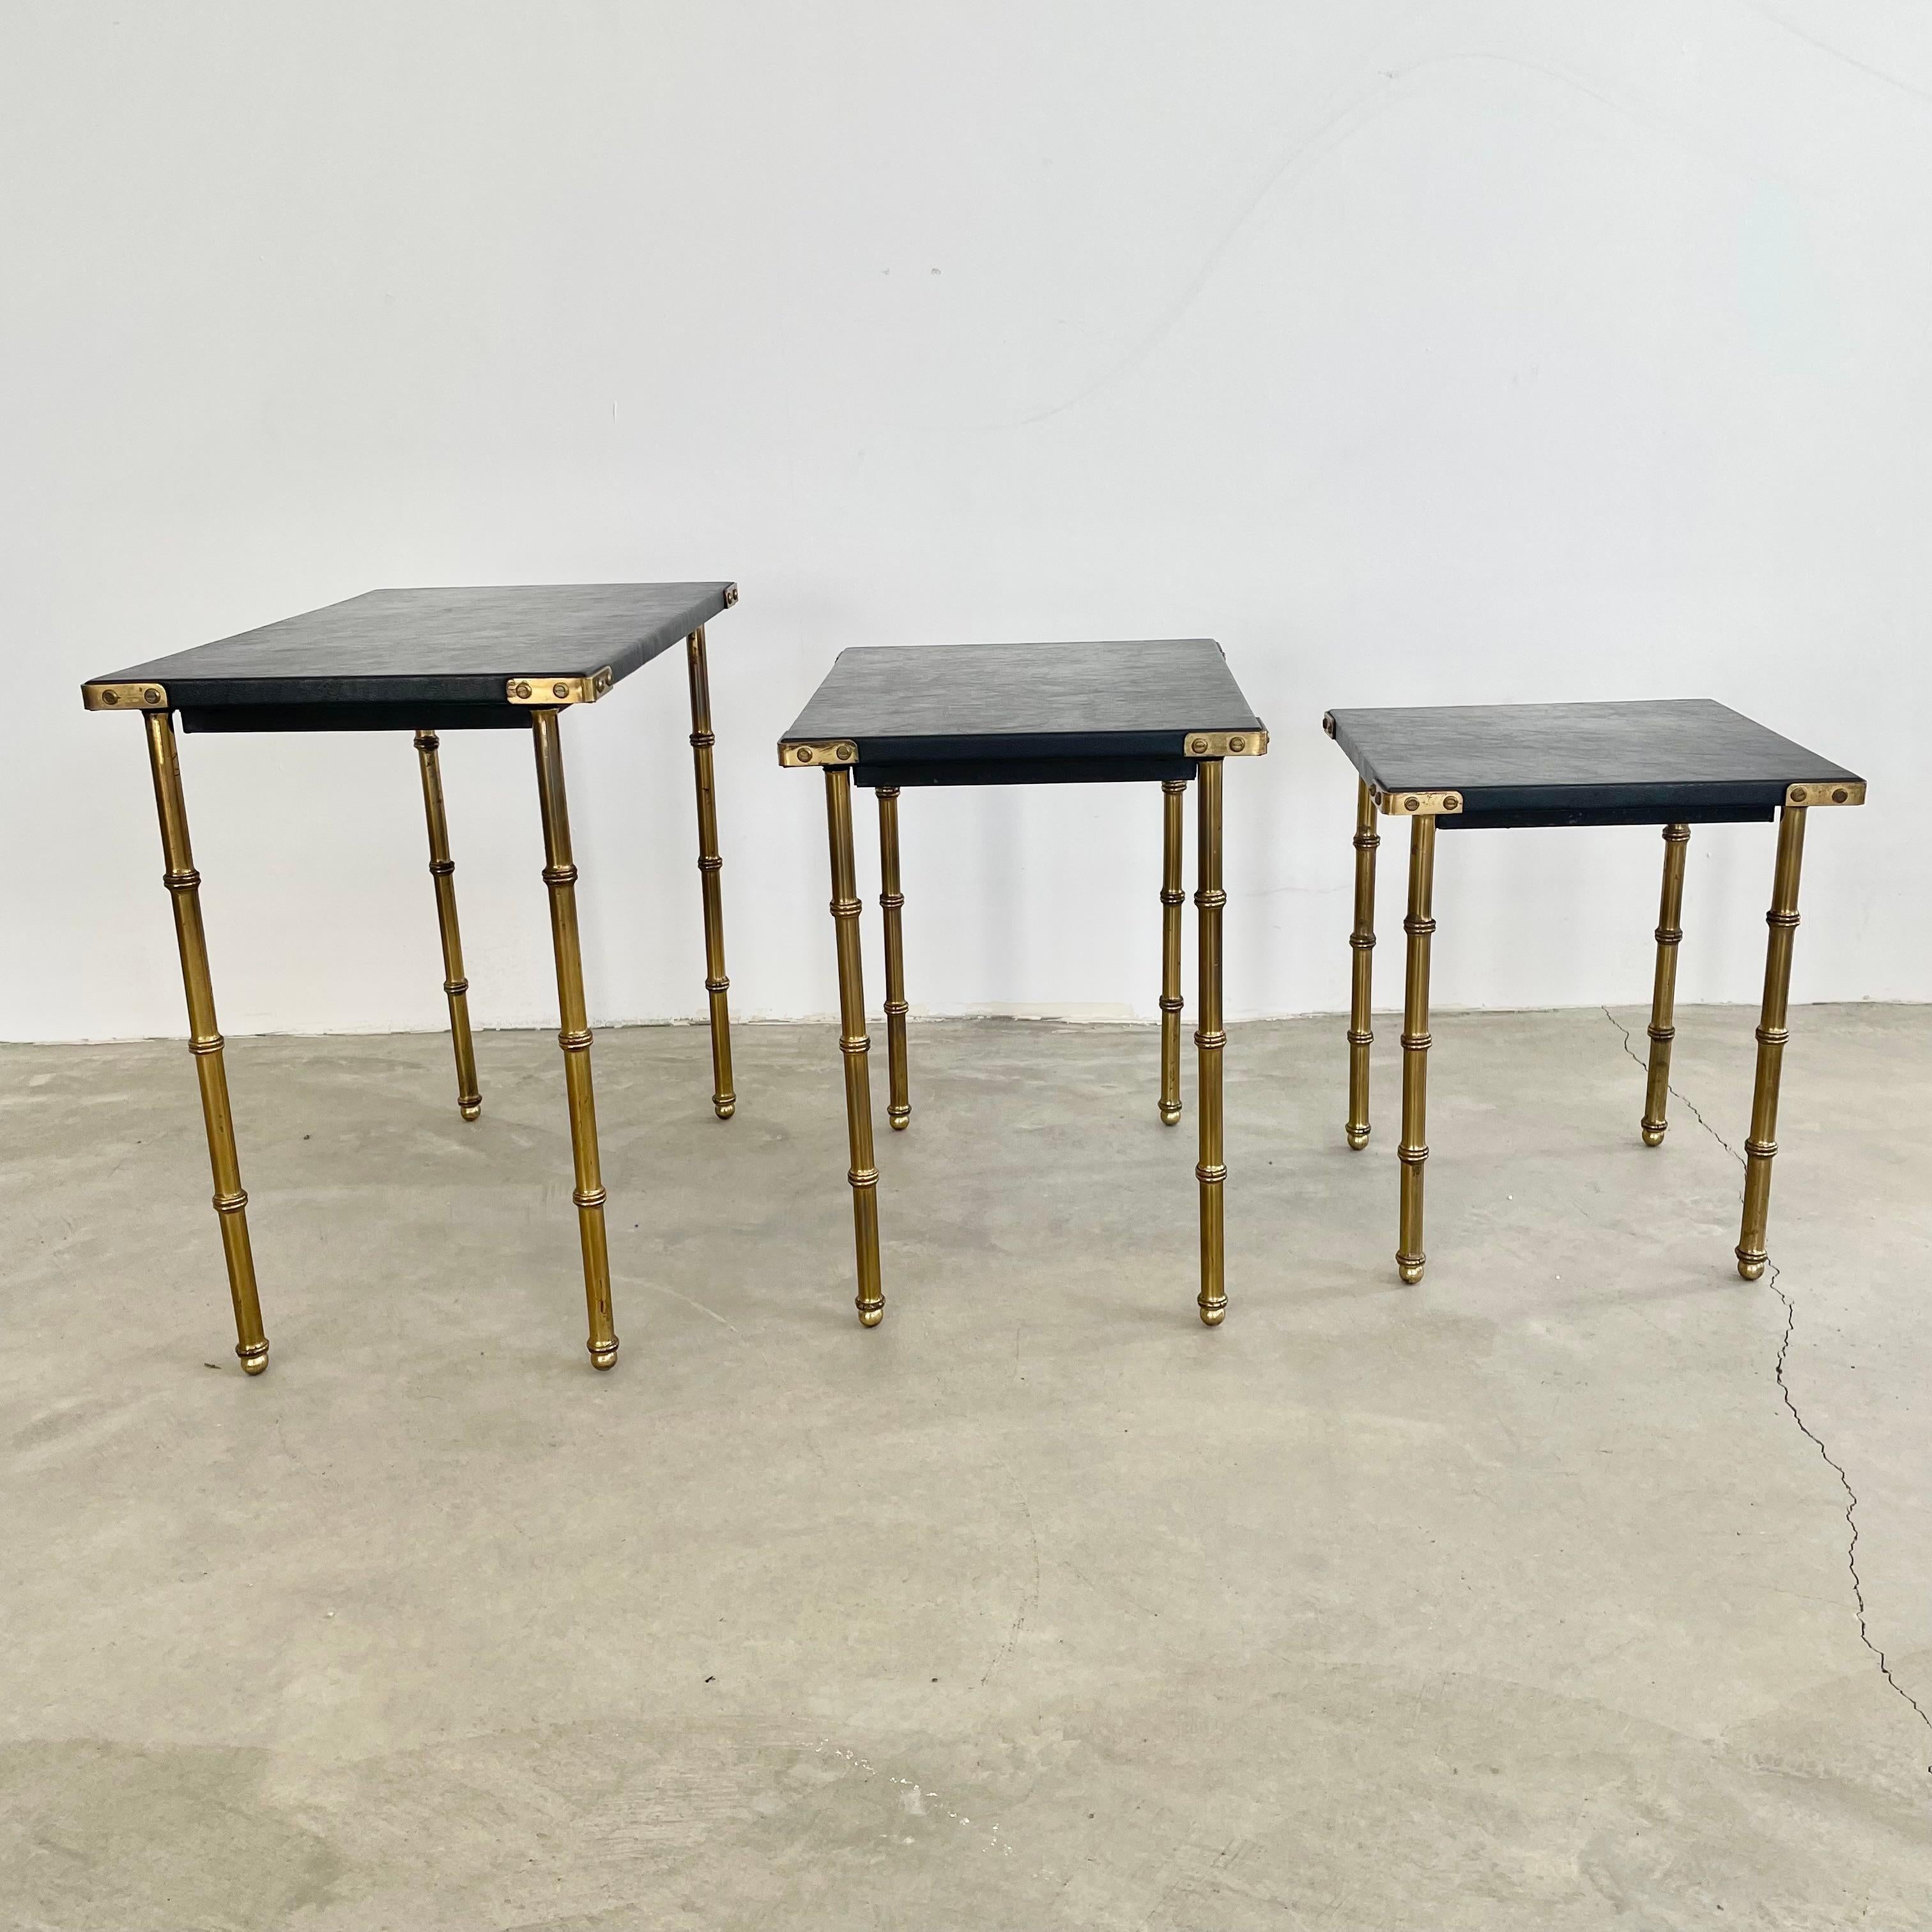 Set of 3 Jacques Adnet Nesting Tables, 1950s France For Sale 4